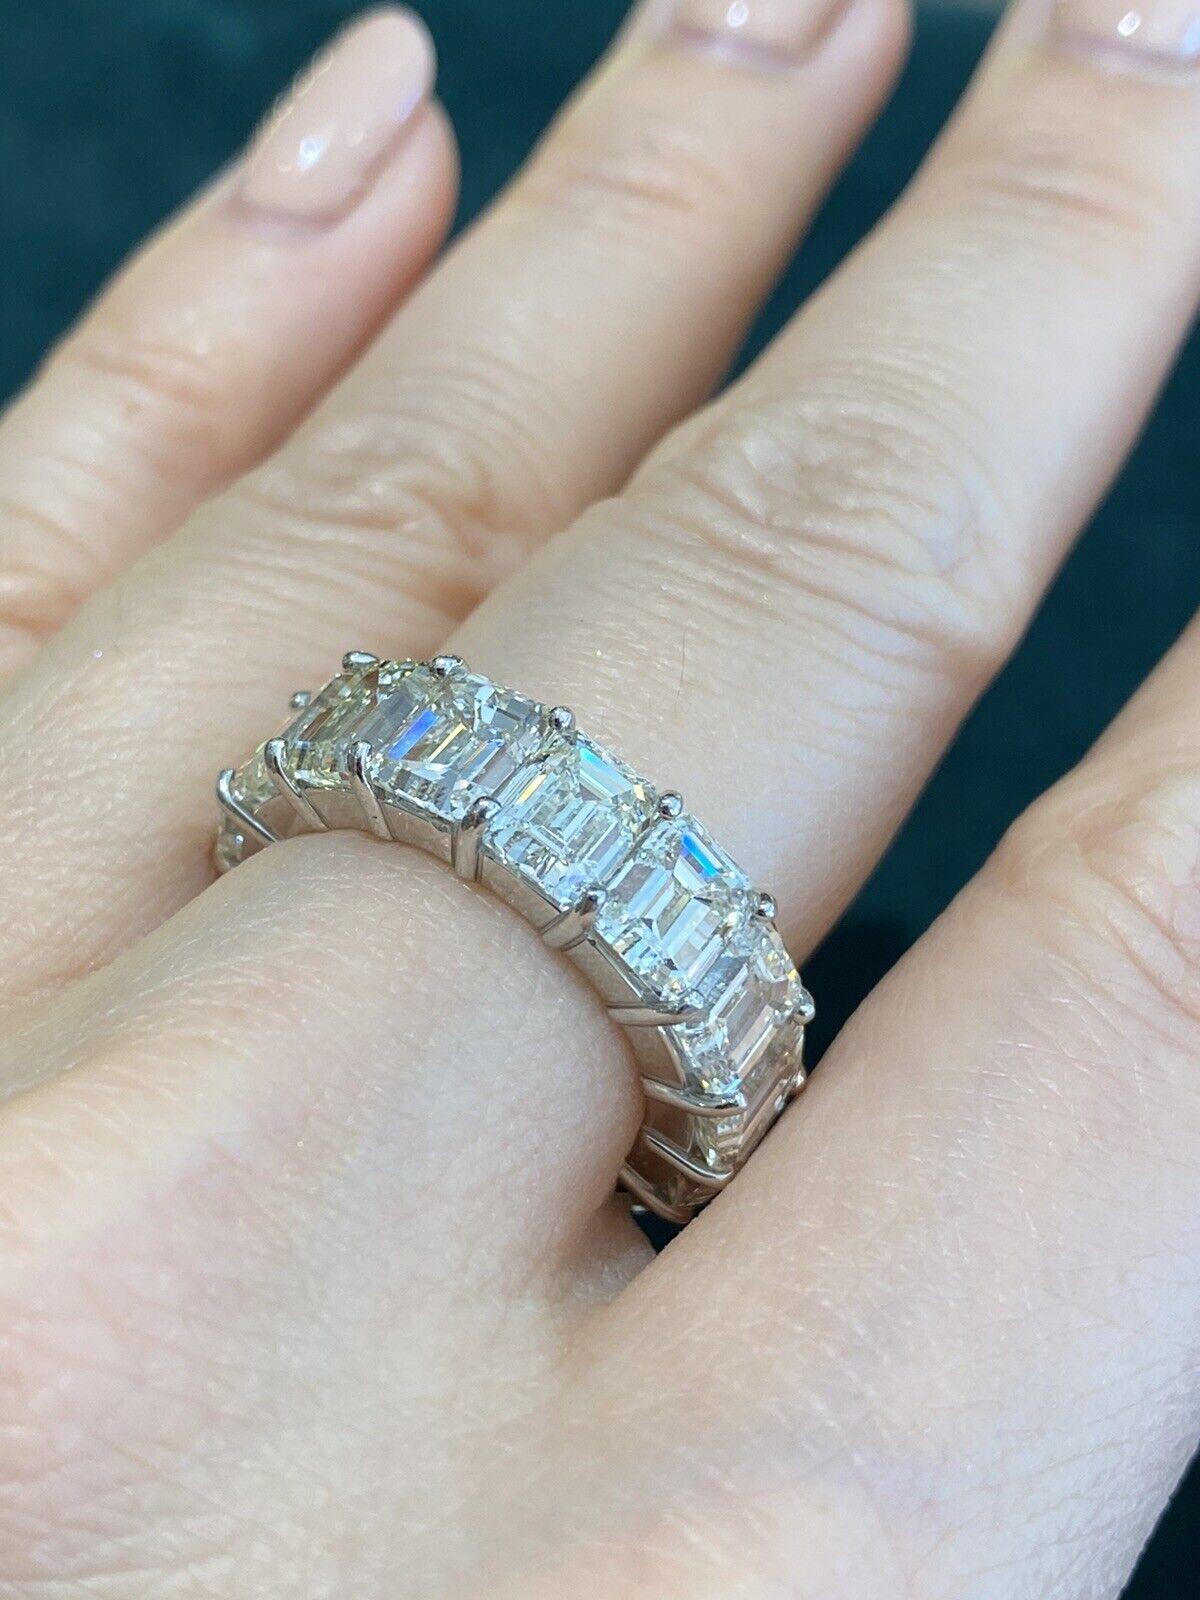 15.16 Cts. Emerald Cut Diamond Eternity Band Ring in Platinum For Sale 2